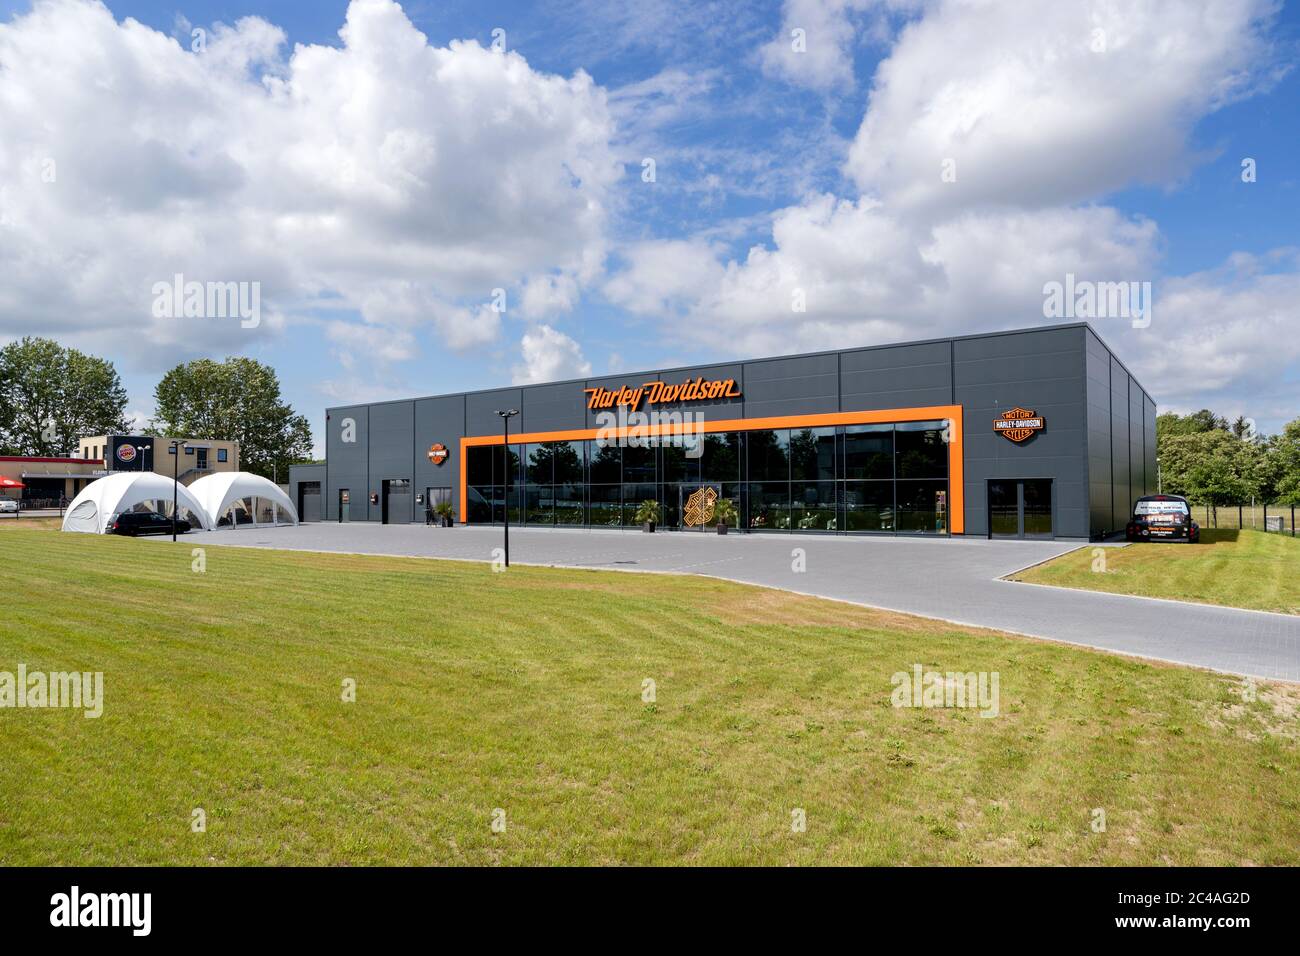 Harley Davidson Dealer In Rostock Germany Harley Davidson Is An American Motorcycle Manufacturer Founded In 1903 In Milwaukee Wisconsin Stock Photo Alamy